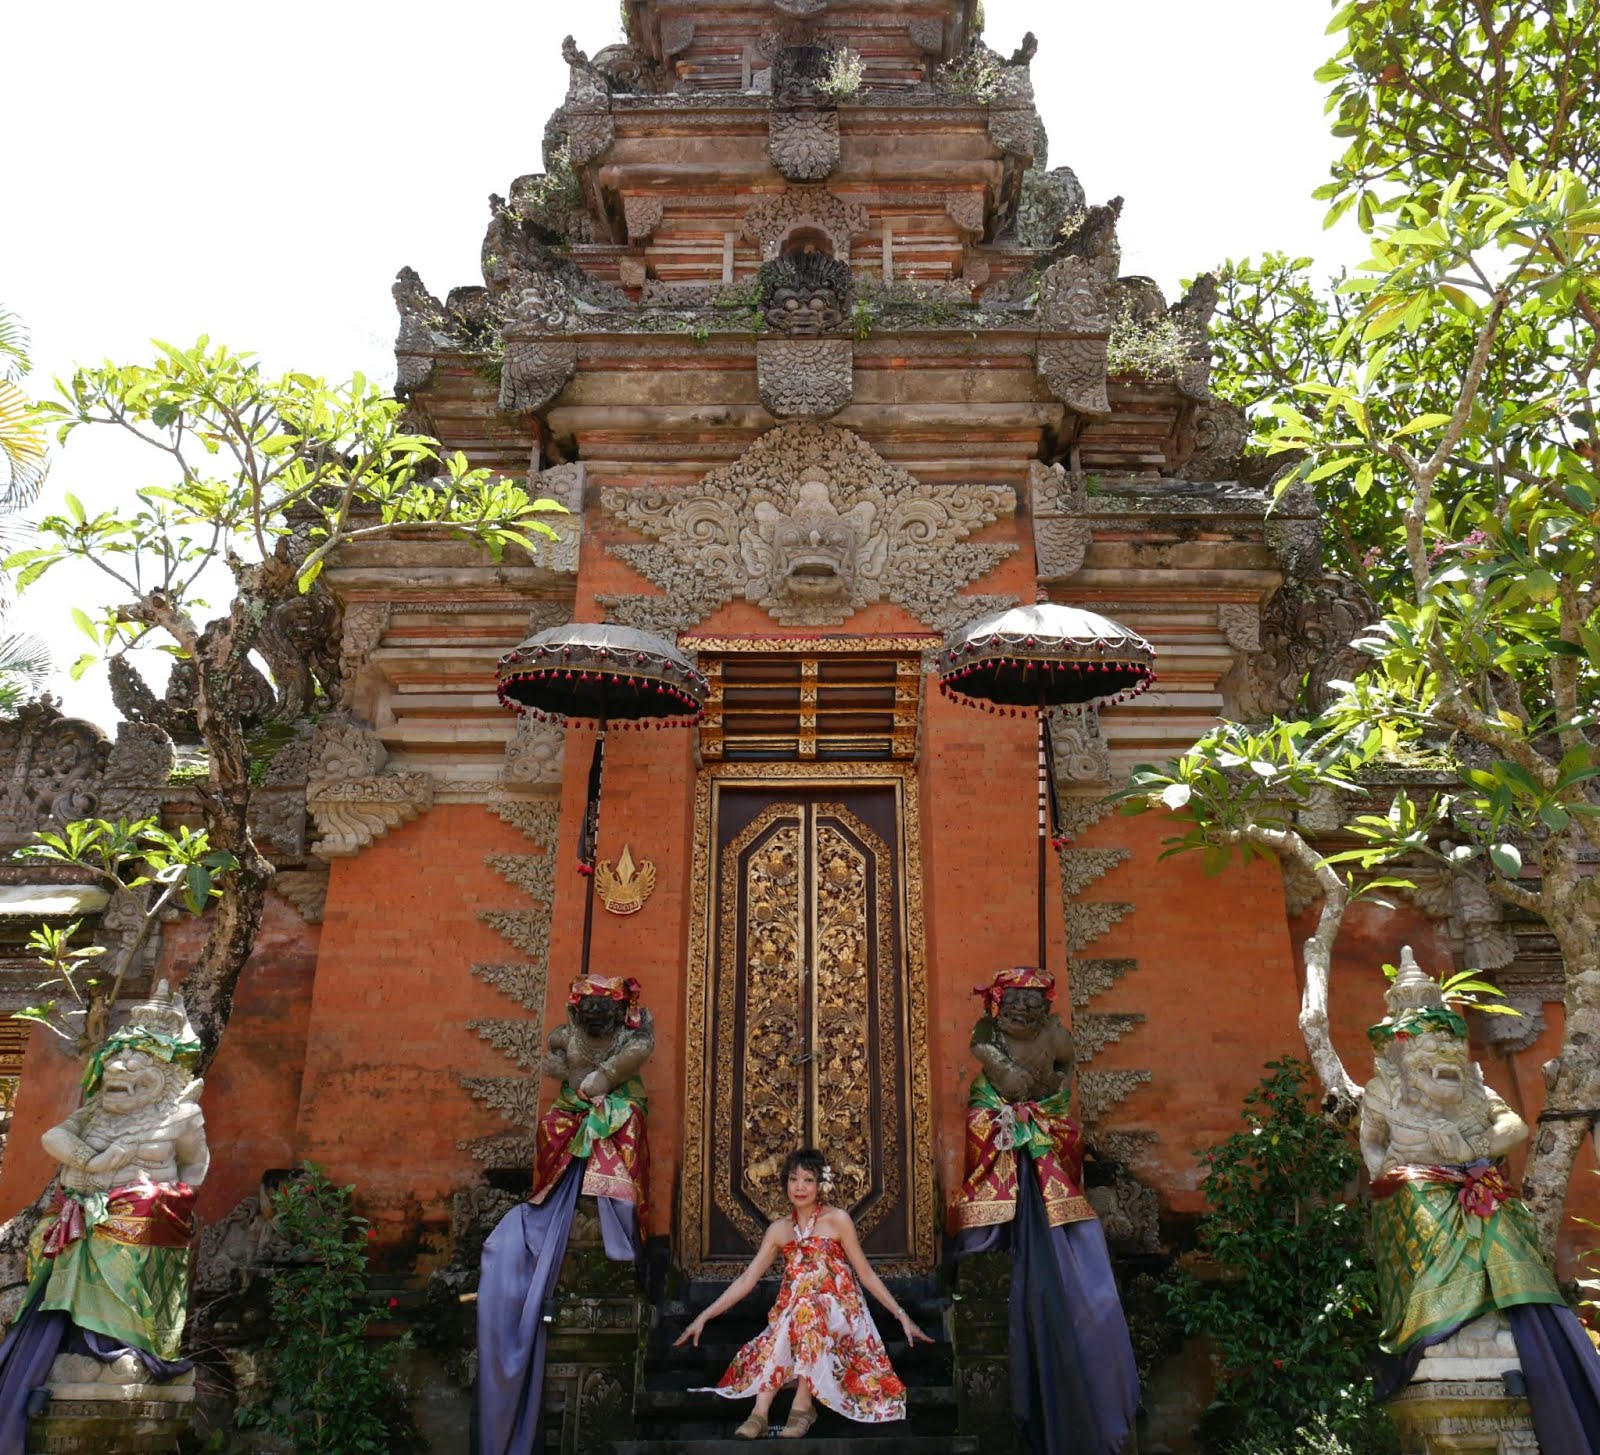 The Royal Temple's Main Gate